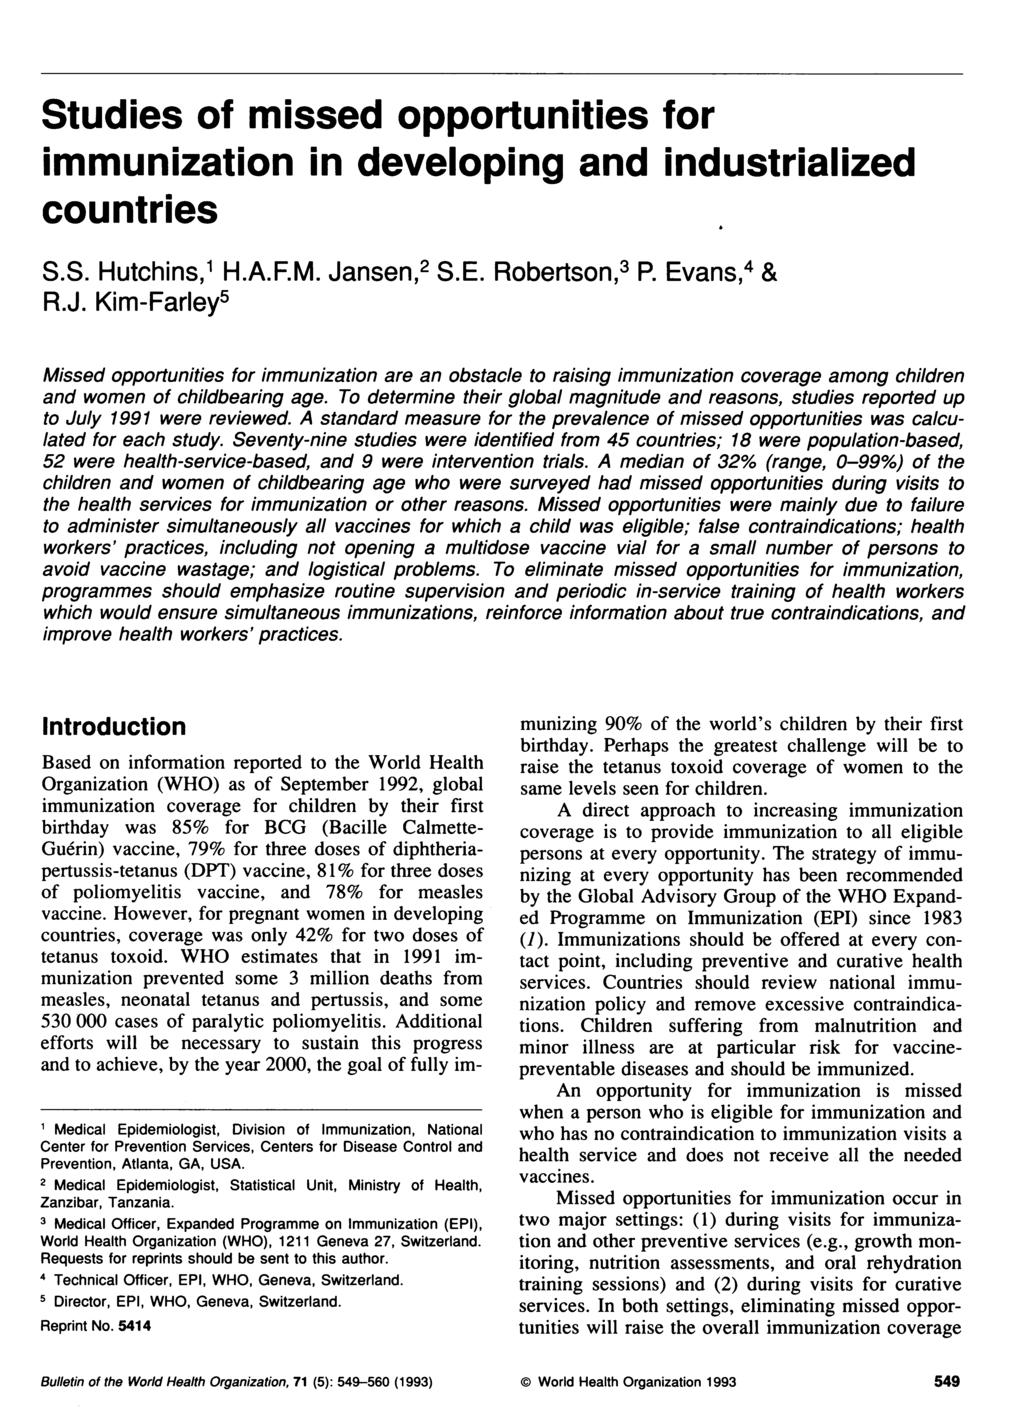 Studies of missed opportunities for immunization in developing and industrialized countries S.S. Hutchins,1 H.A.F.M. Ja